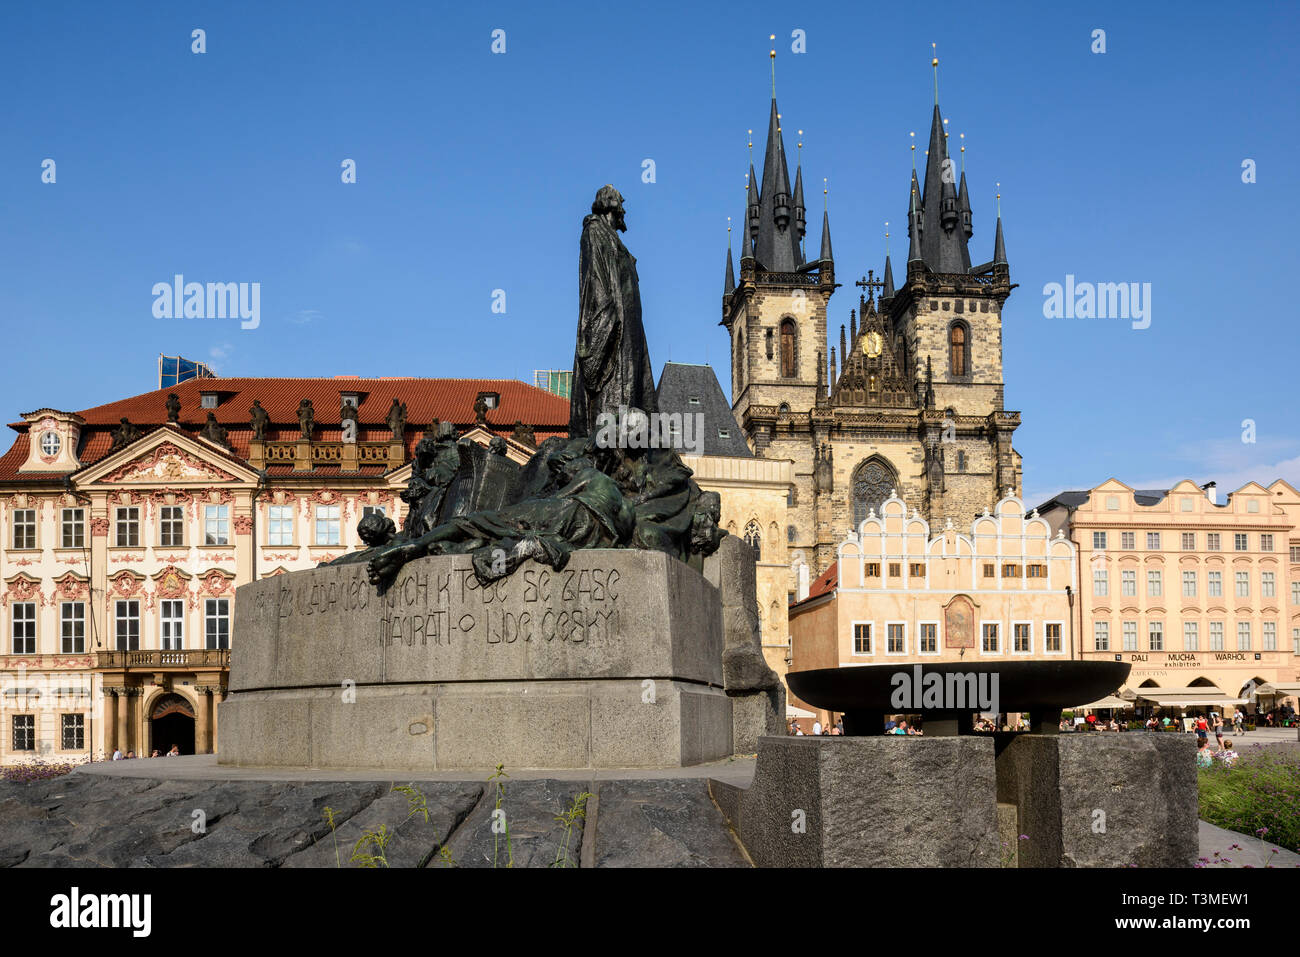 Prague. Czech Republic. Statue of Jan Hus & 14th century Church of Our Lady before Týn, Old Town Square. Stock Photo